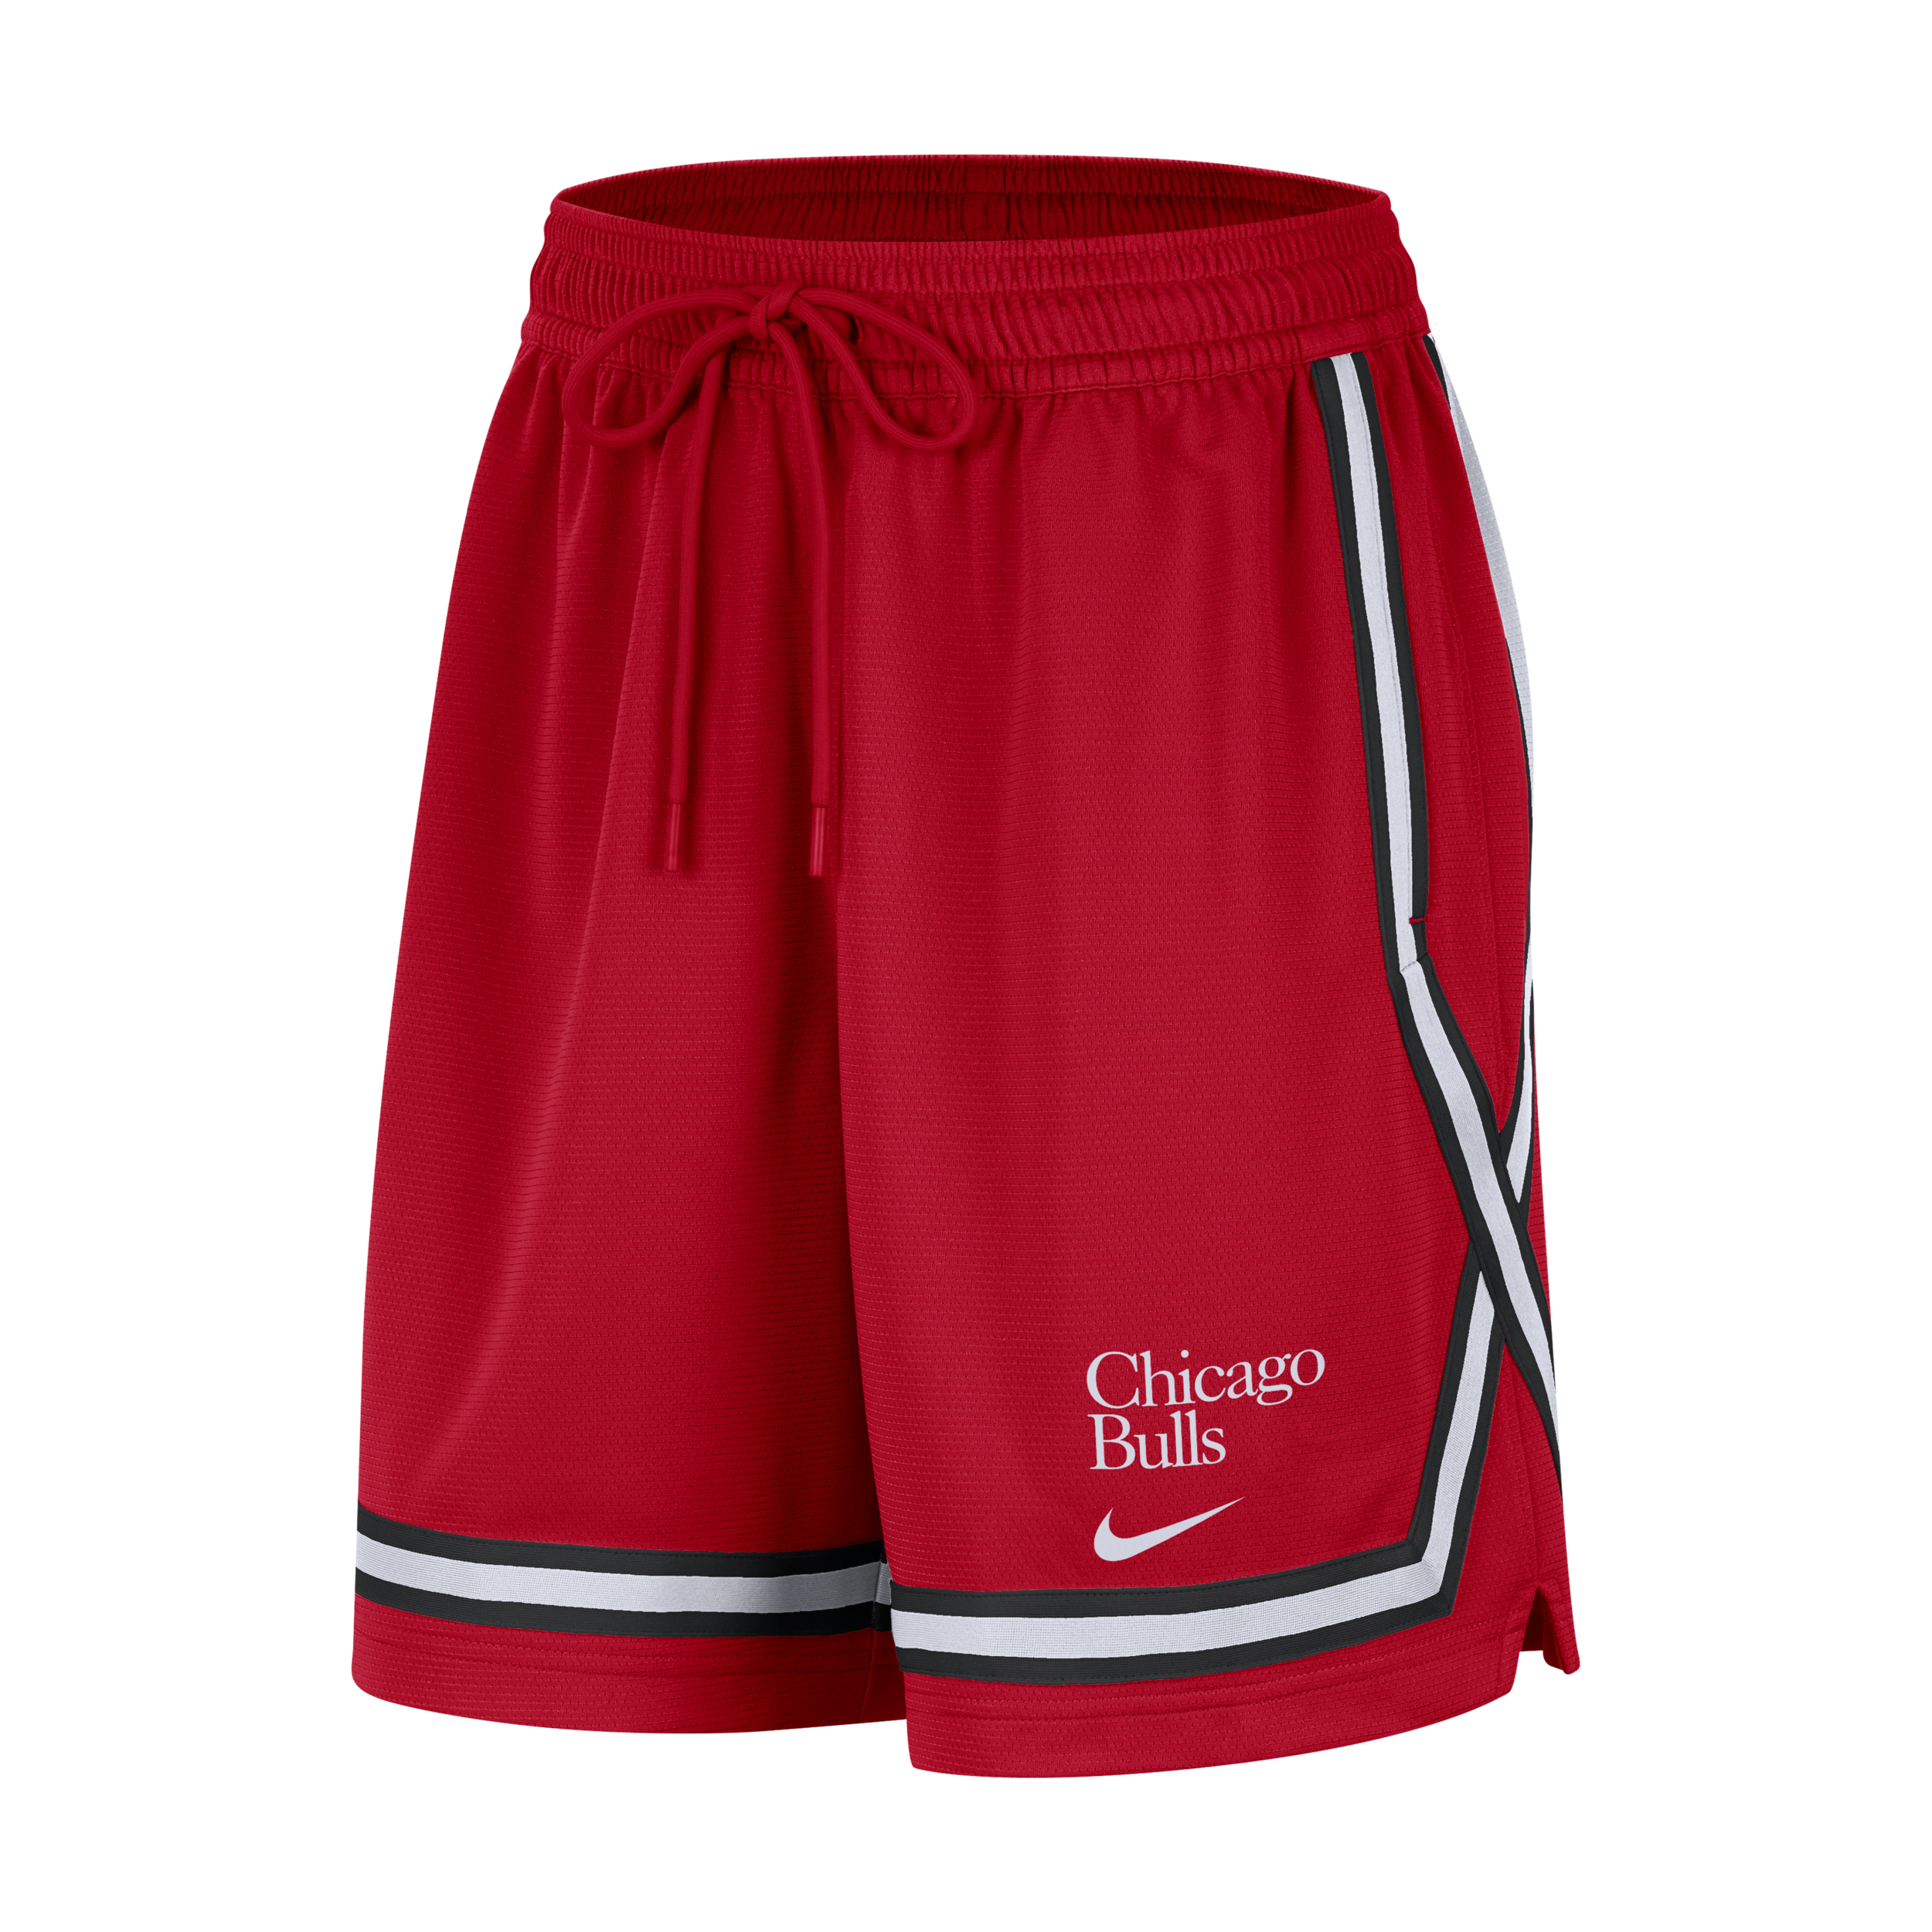 Chicago Bulls Fly Crossover Nike Dri-FIT NBA-basketbalshorts met graphic voor dames - Rood